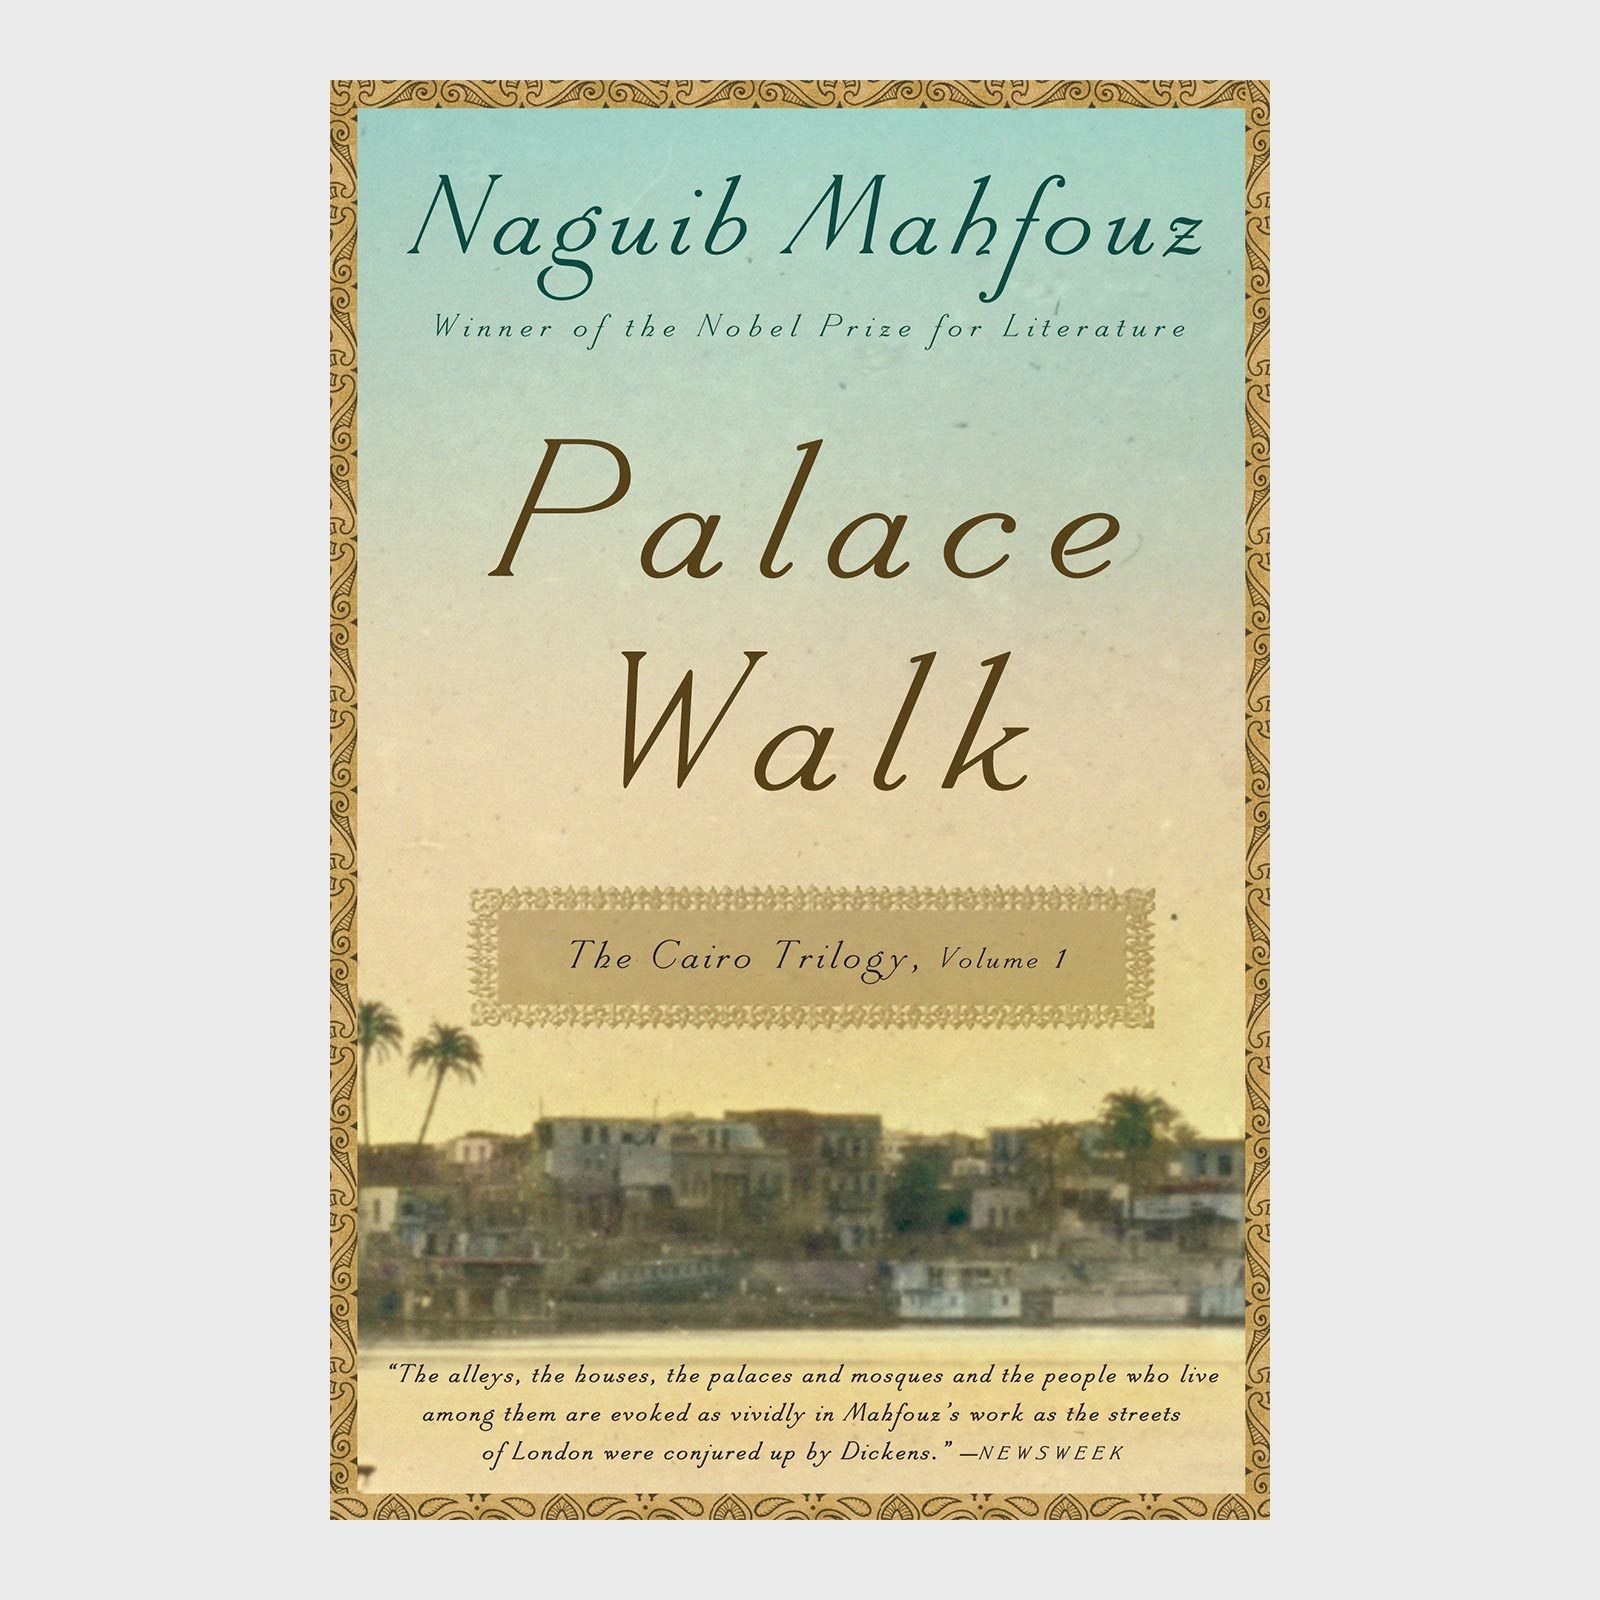 <h3><em>Palace</em> <em>Walk </em>by Naguib Mahfouz</h3> <p><strong>Setting:</strong> Cairo, Egypt</p> <p>Nobel Prize–winning author Naguib Mahfouz's 2011 start to his Cairo Trilogy, <em><a href="https://www.amazon.com/Palace-Walk-Cairo-Trilogy-1/dp/0307947106" rel="noopener noreferrer">Palace Walk</a></em>, places readers in the middle of 20th-century Egypt. They're swept into the drama of a middle-class family with struggles and tensions that mirror the greater turbulence of Egypt under the thumb of British rule. The father, al-Sayyid Ahmad Abd al-Jawad, rules his house with an iron fist. A vivid exploration of complex Cairo, plus reflections on how each family member deals with the controlling household and government, makes this a moving <a href="https://www.rd.com/list/historical-fiction-books/" rel="noopener noreferrer">historical fiction</a> work that is also one of the great travel books about northern Africa.</p> <p class="listicle-page__cta-button-shop"><a class="shop-btn" href="https://www.amazon.com/Palace-Walk-Cairo-Trilogy-1/dp/0307947106">Shop Now</a></p>